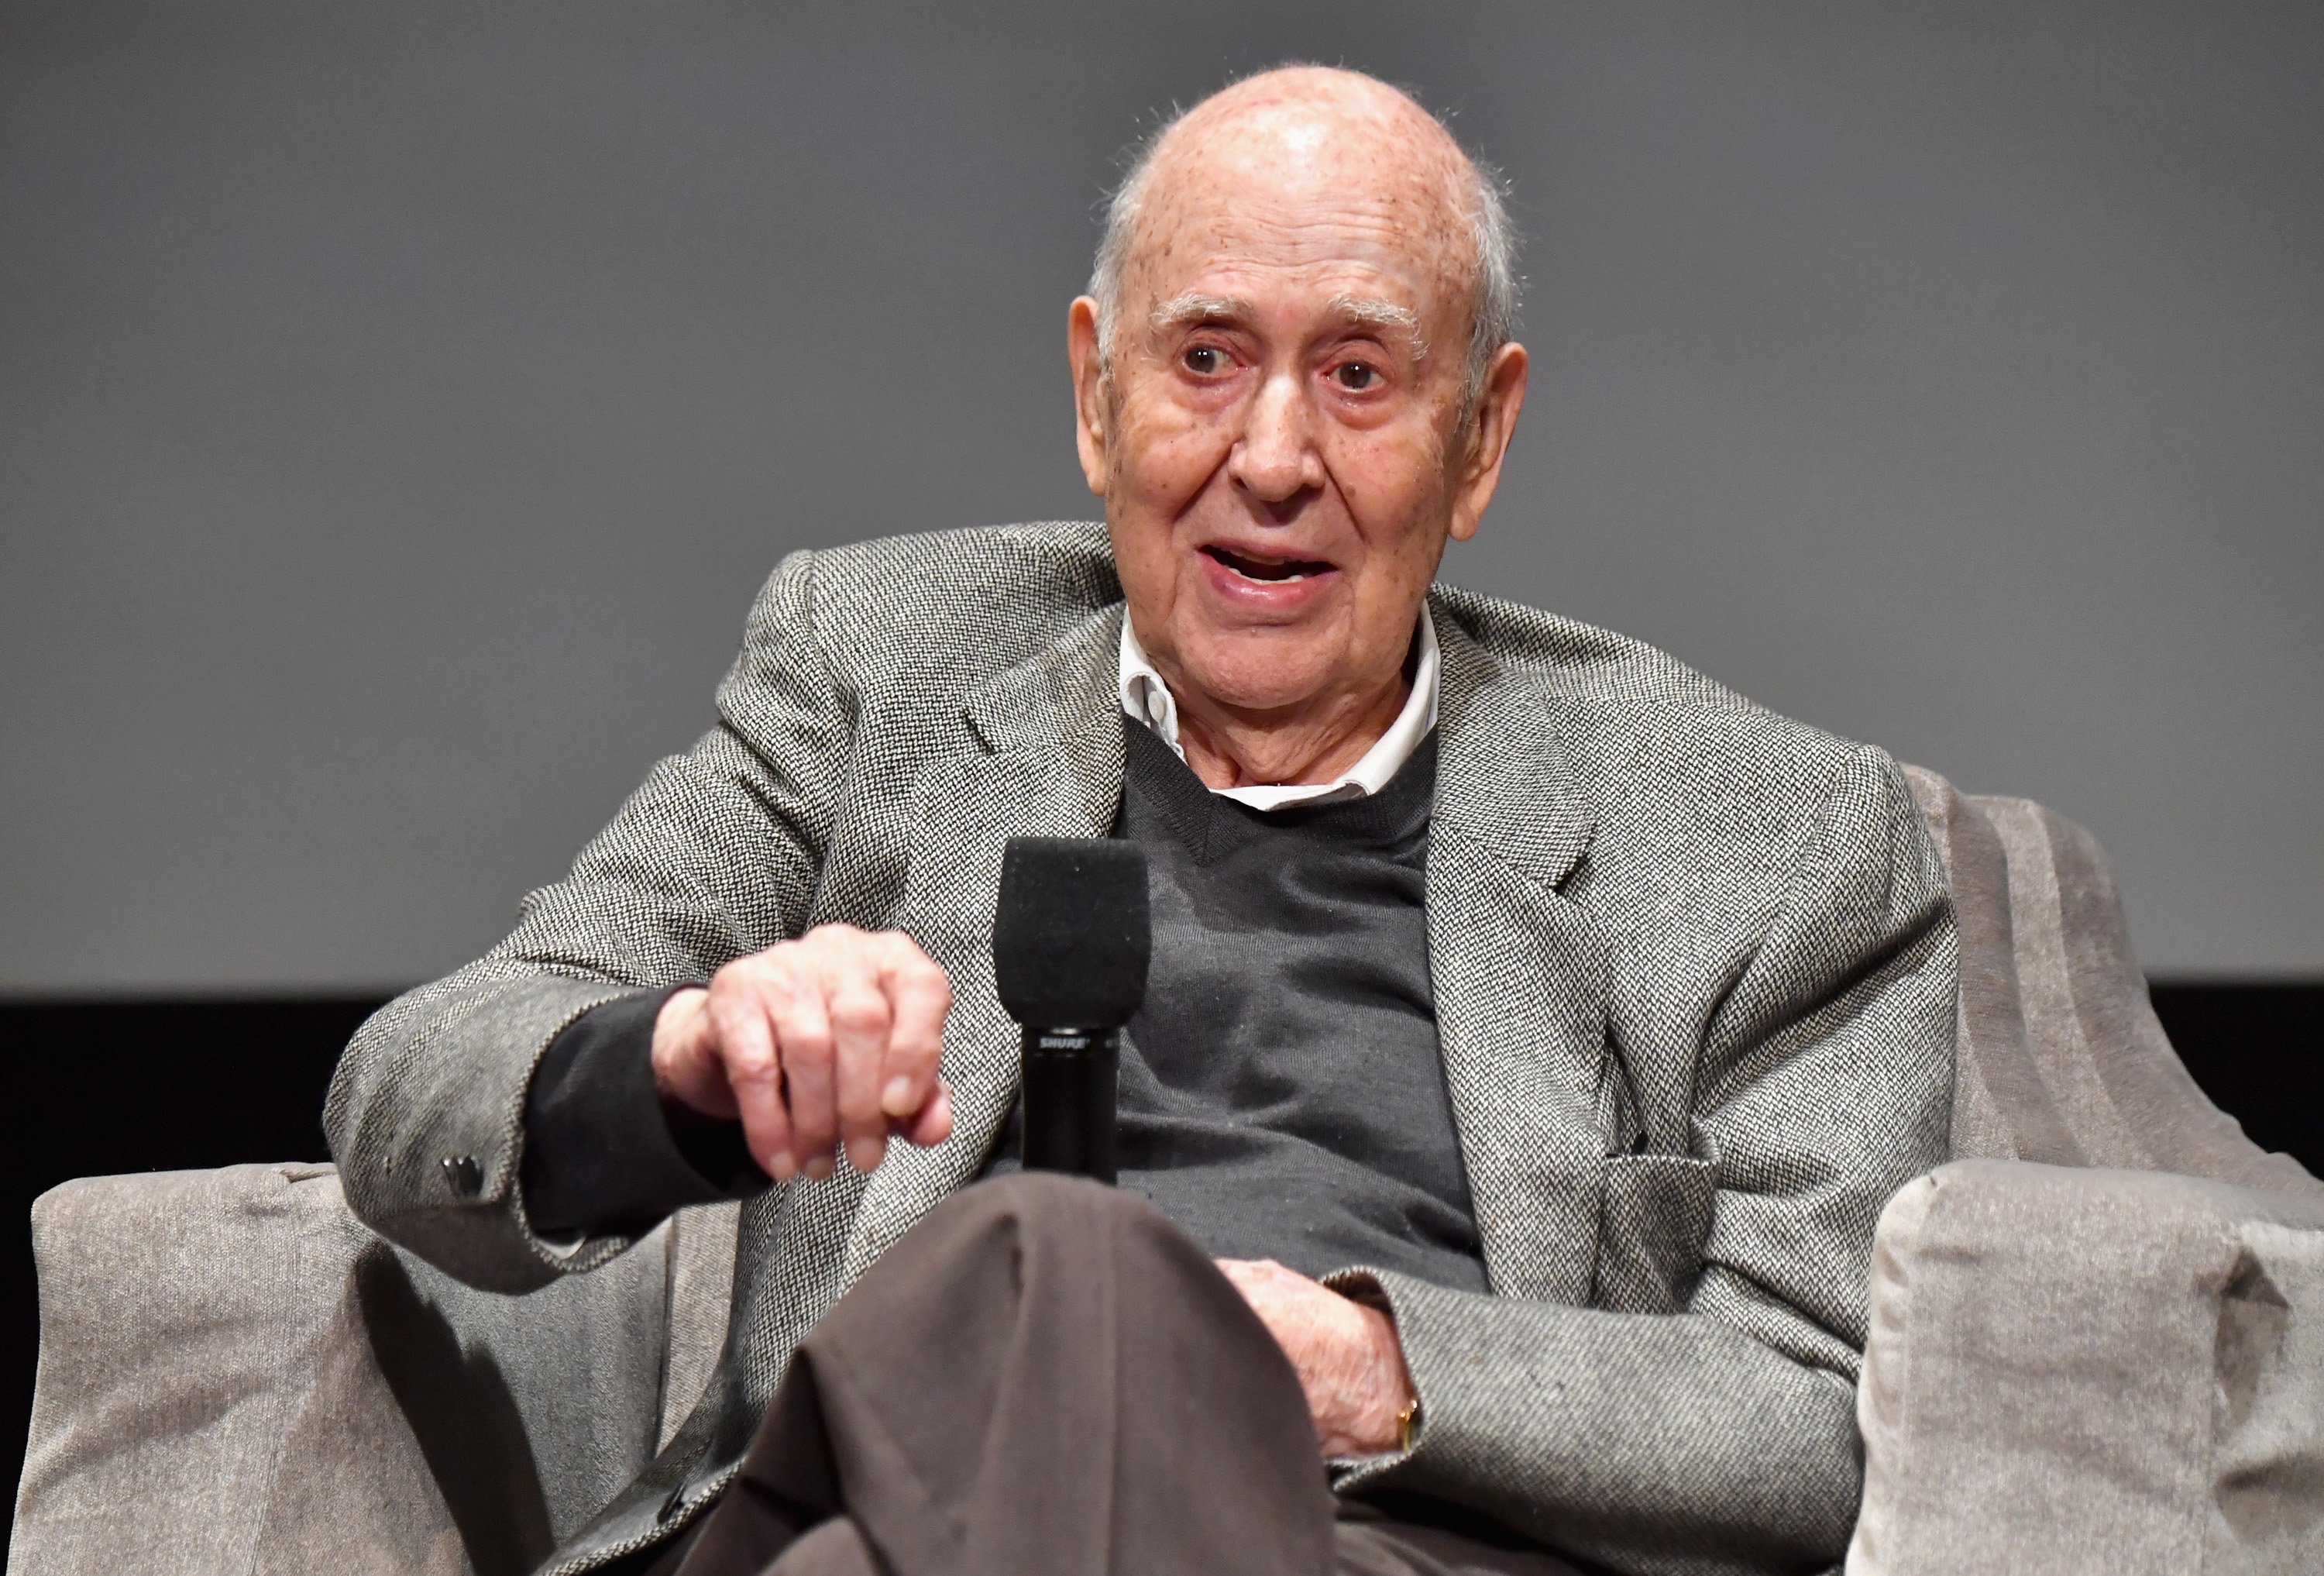 What Was Carl Reiner’s Net Worth at the Time of His Death?